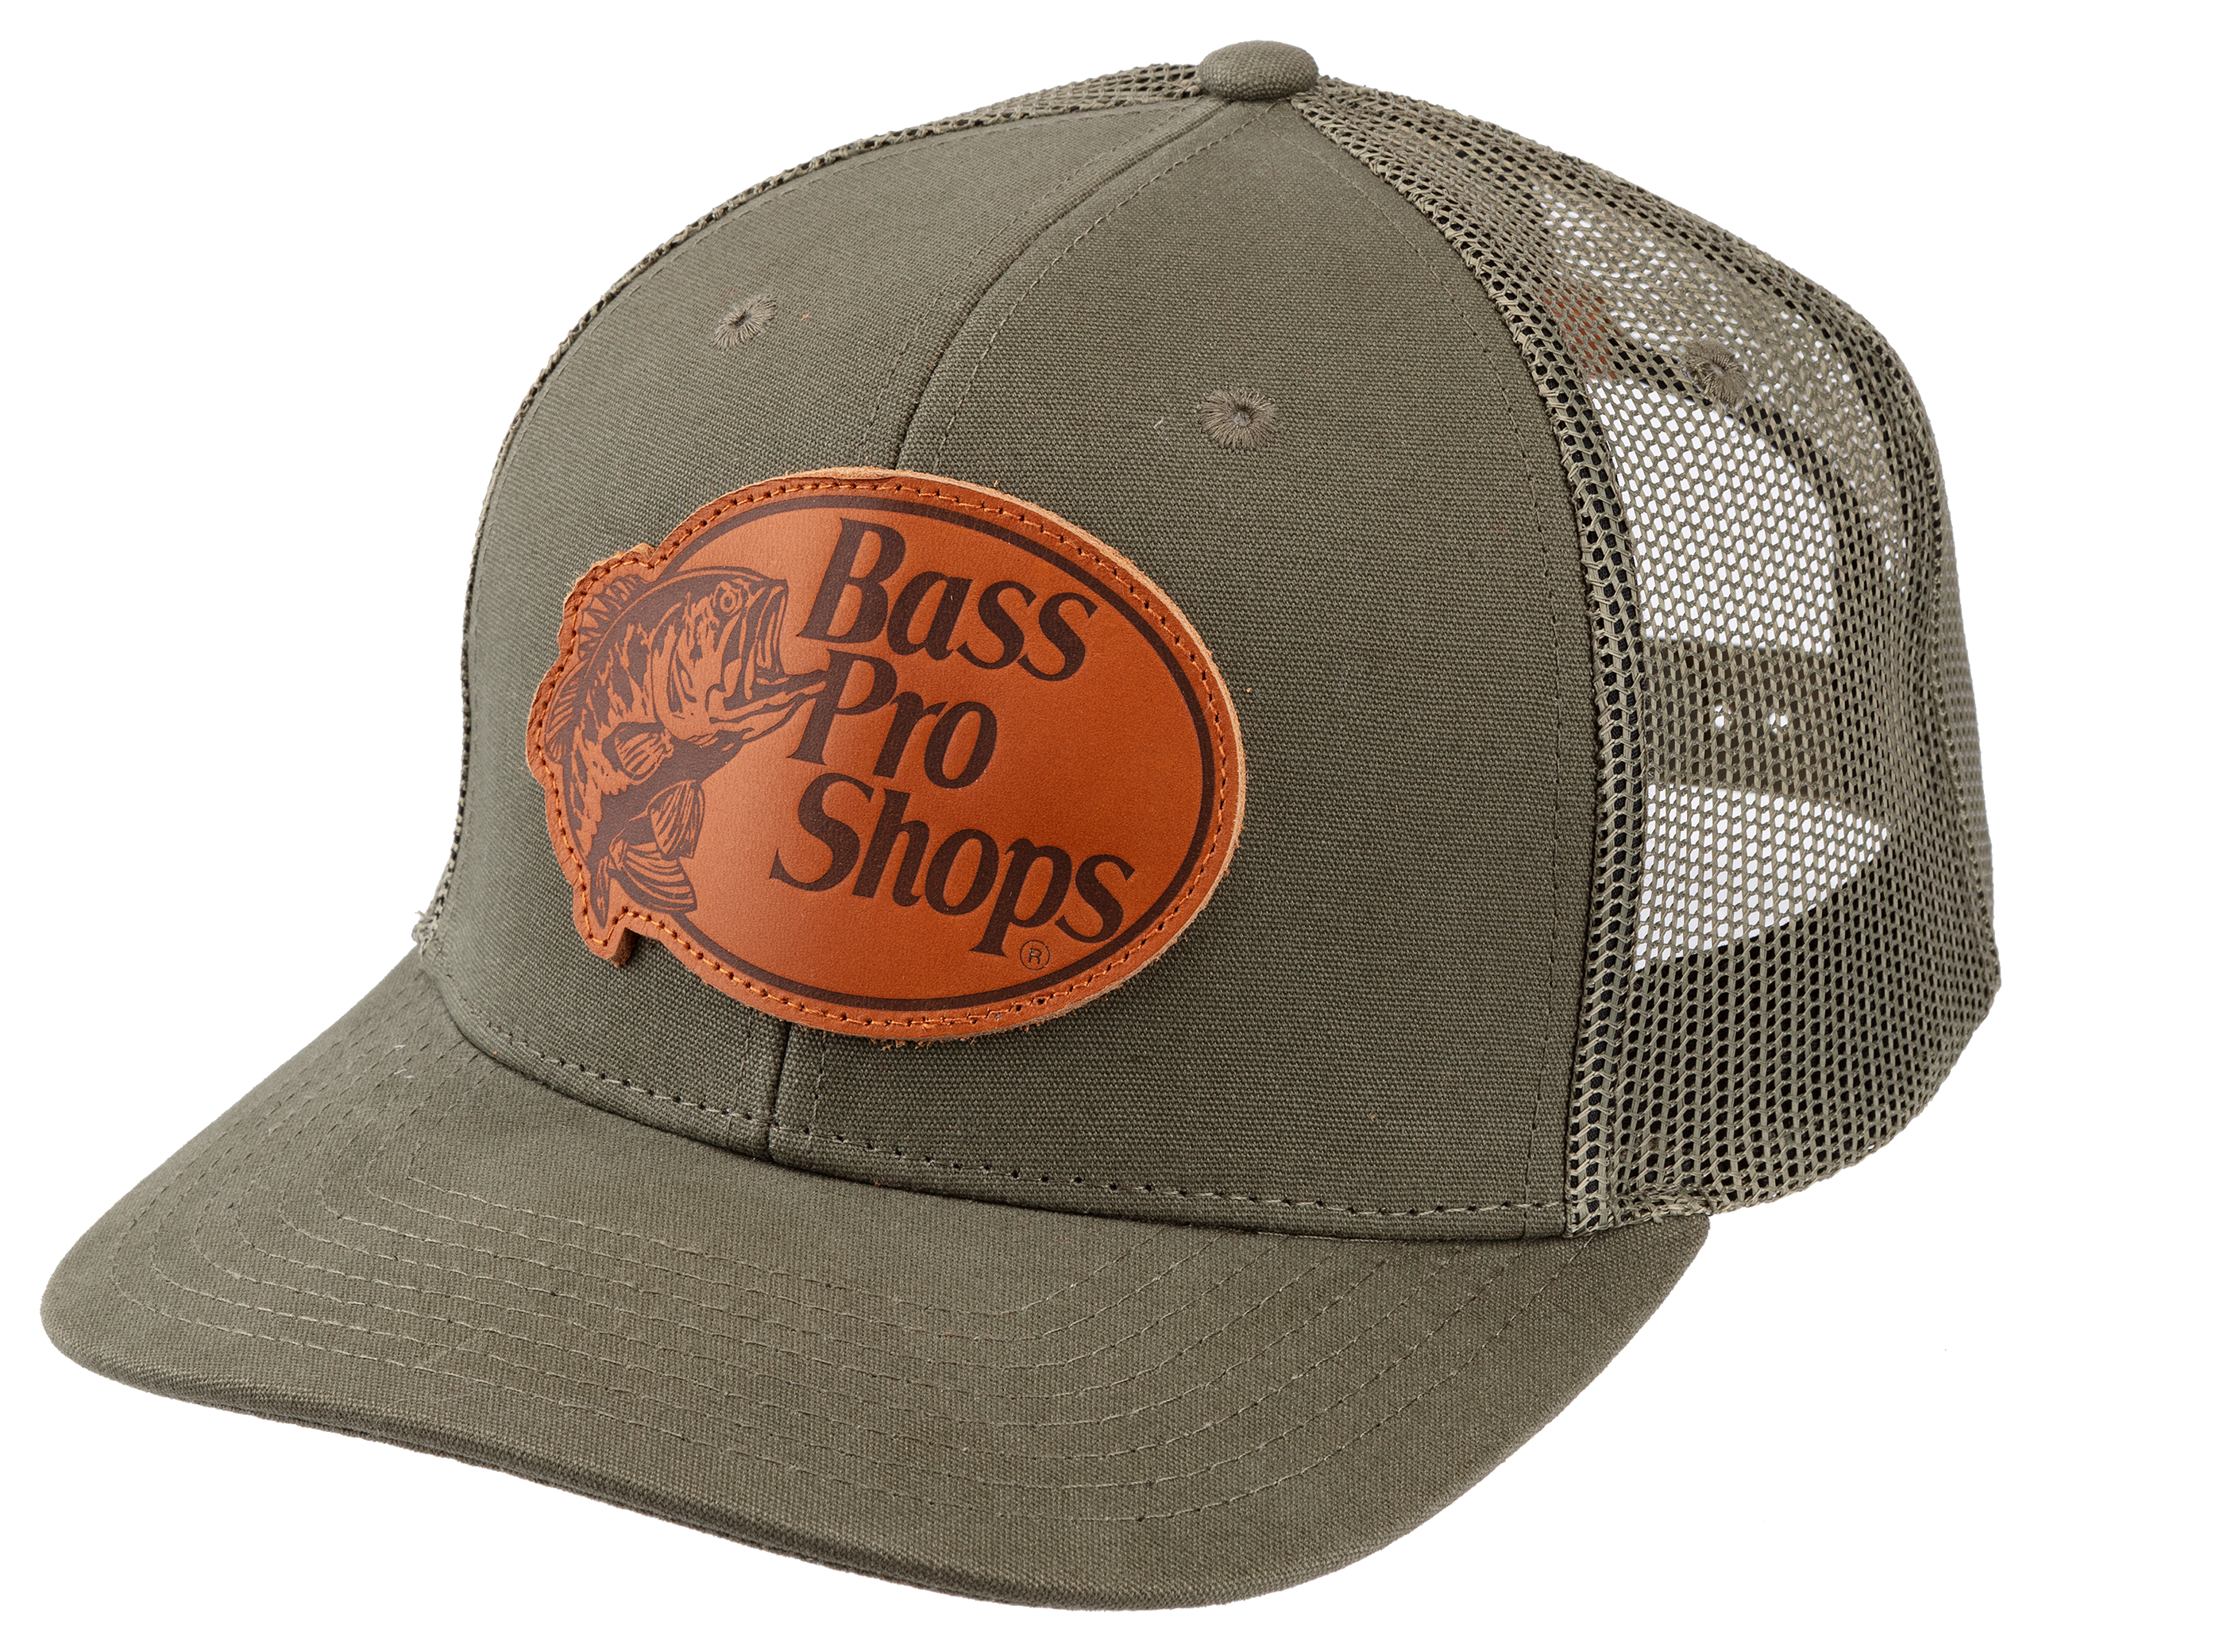 Bass Fishing Leather Patch Hat, Trucker Hat, Large Mouth Bass